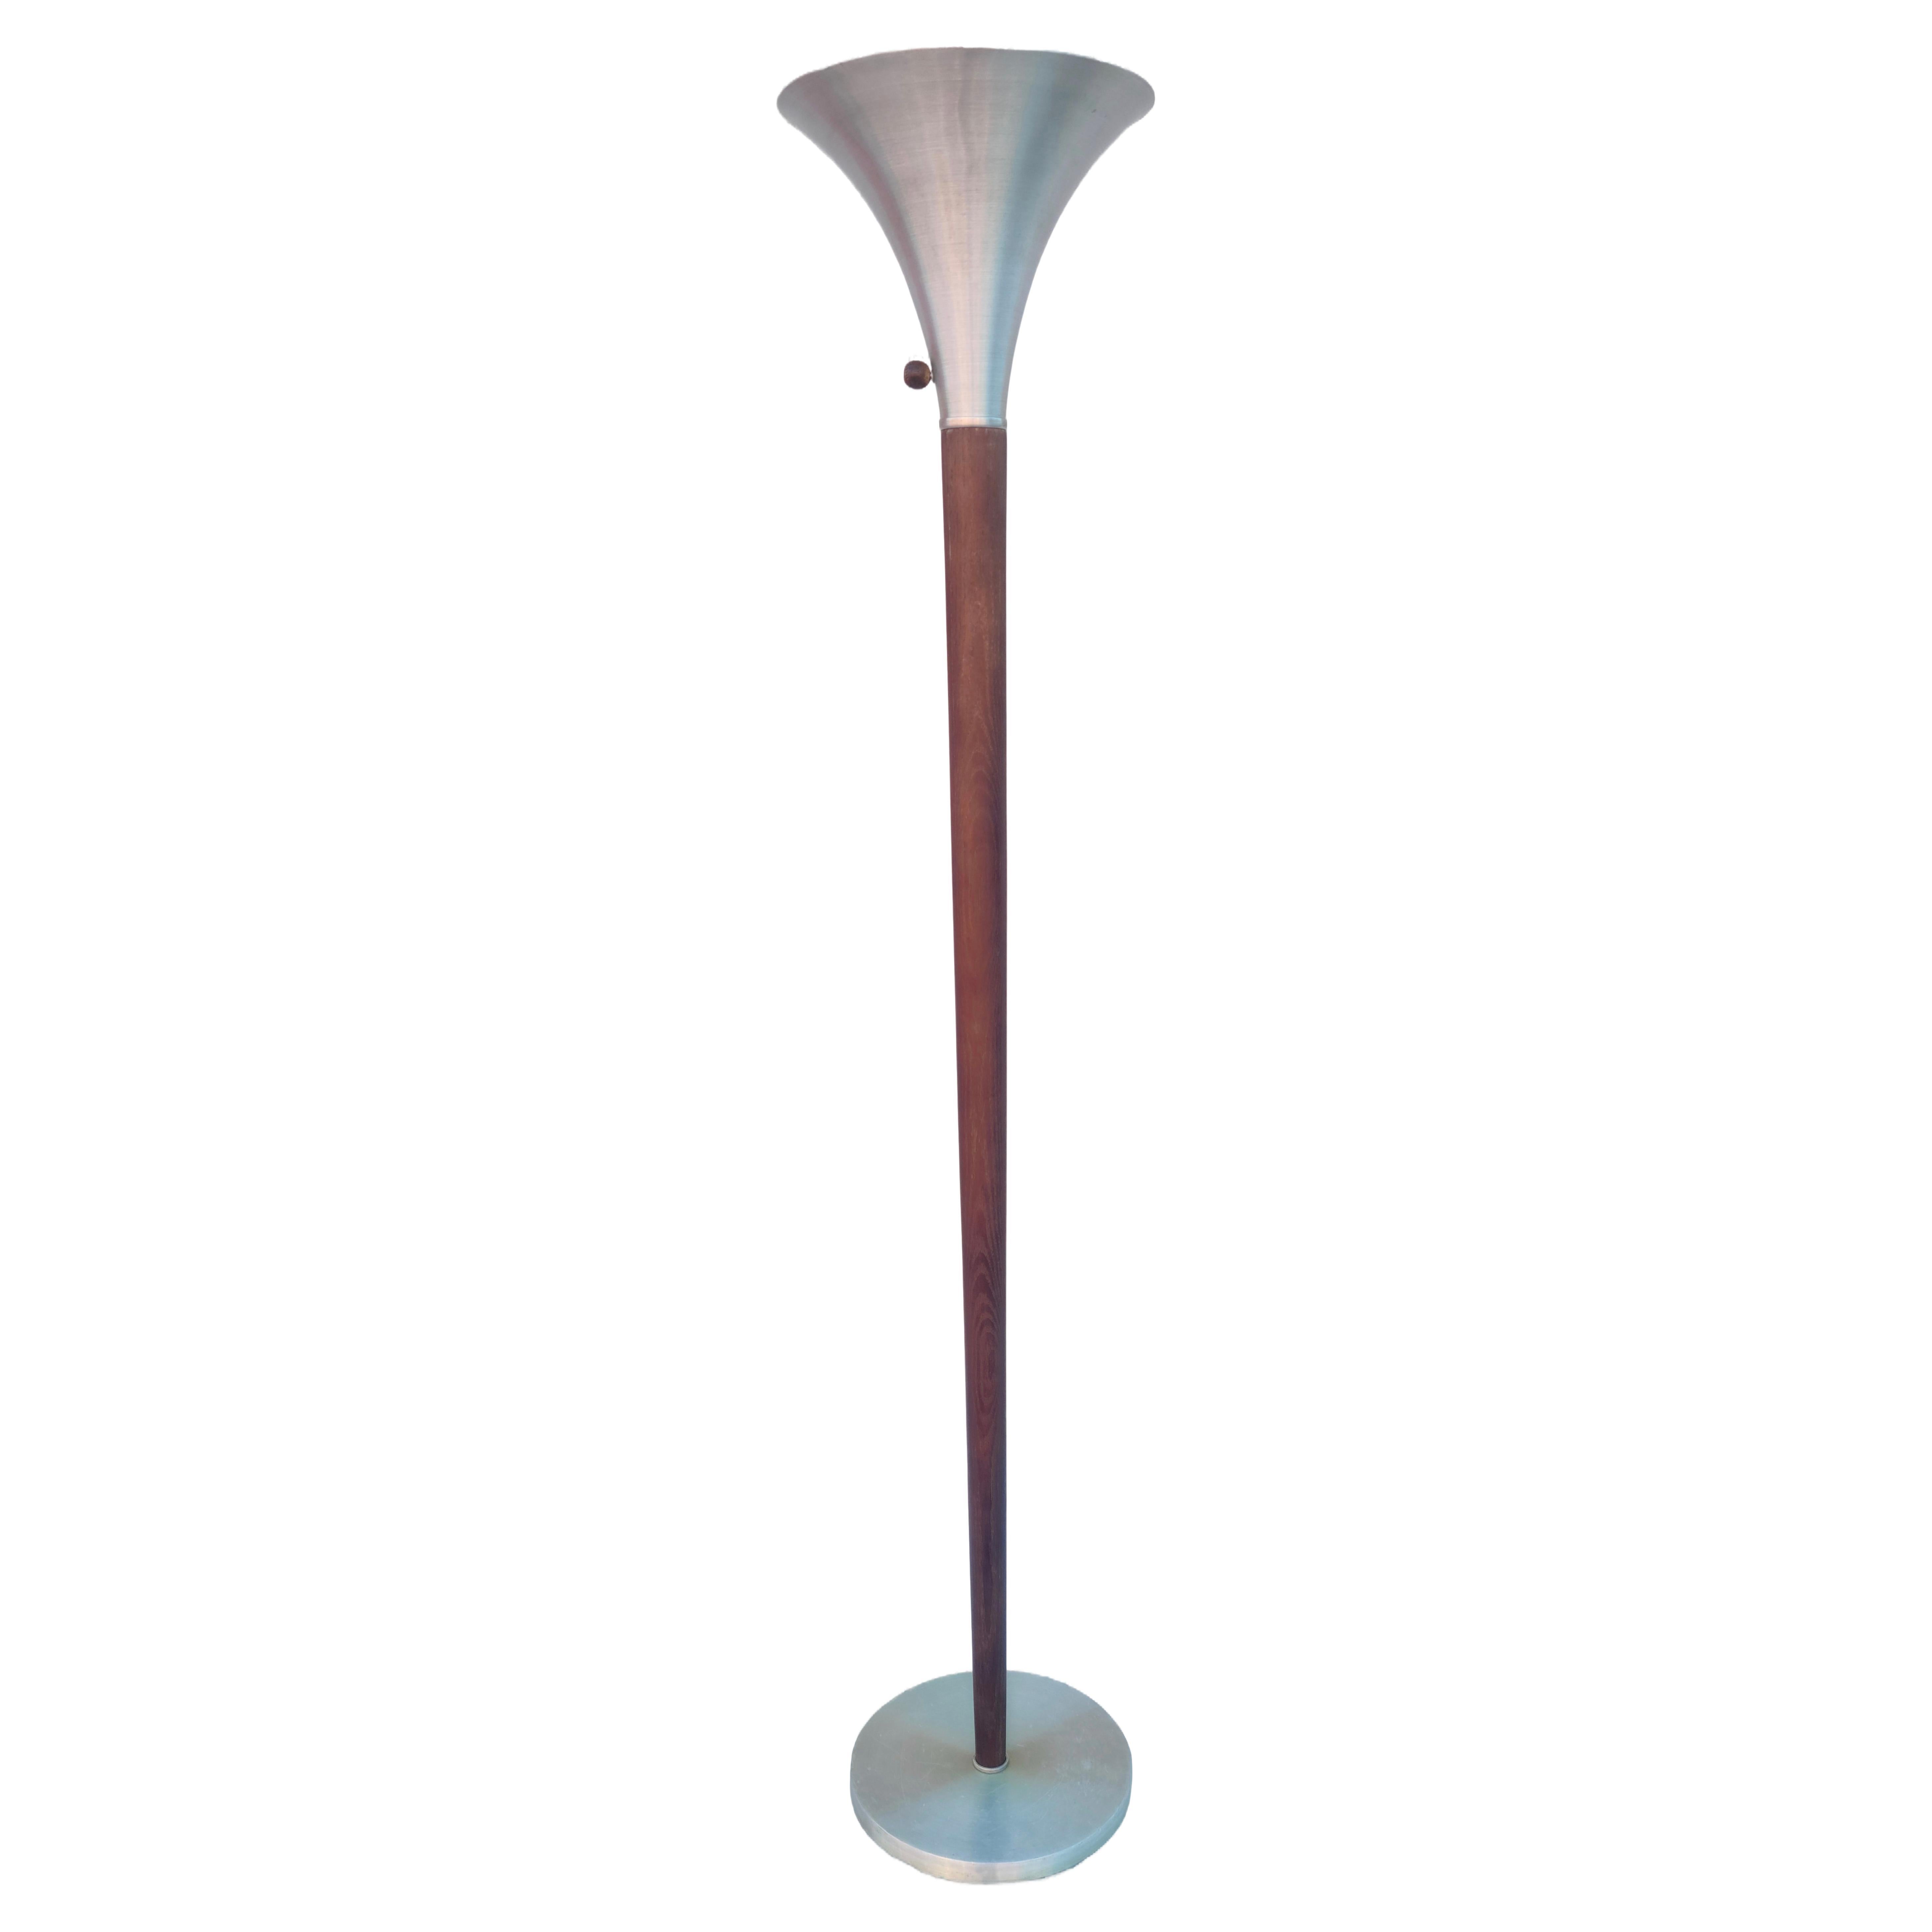 Rare Russell Wright Torchiere Floor Lamp..
Made by Wright Accessories Inc: Catalog #28.
Spun Aluminum Trumpet Torch, Base and Trim.
Classic Russell Wright Design Themes.
